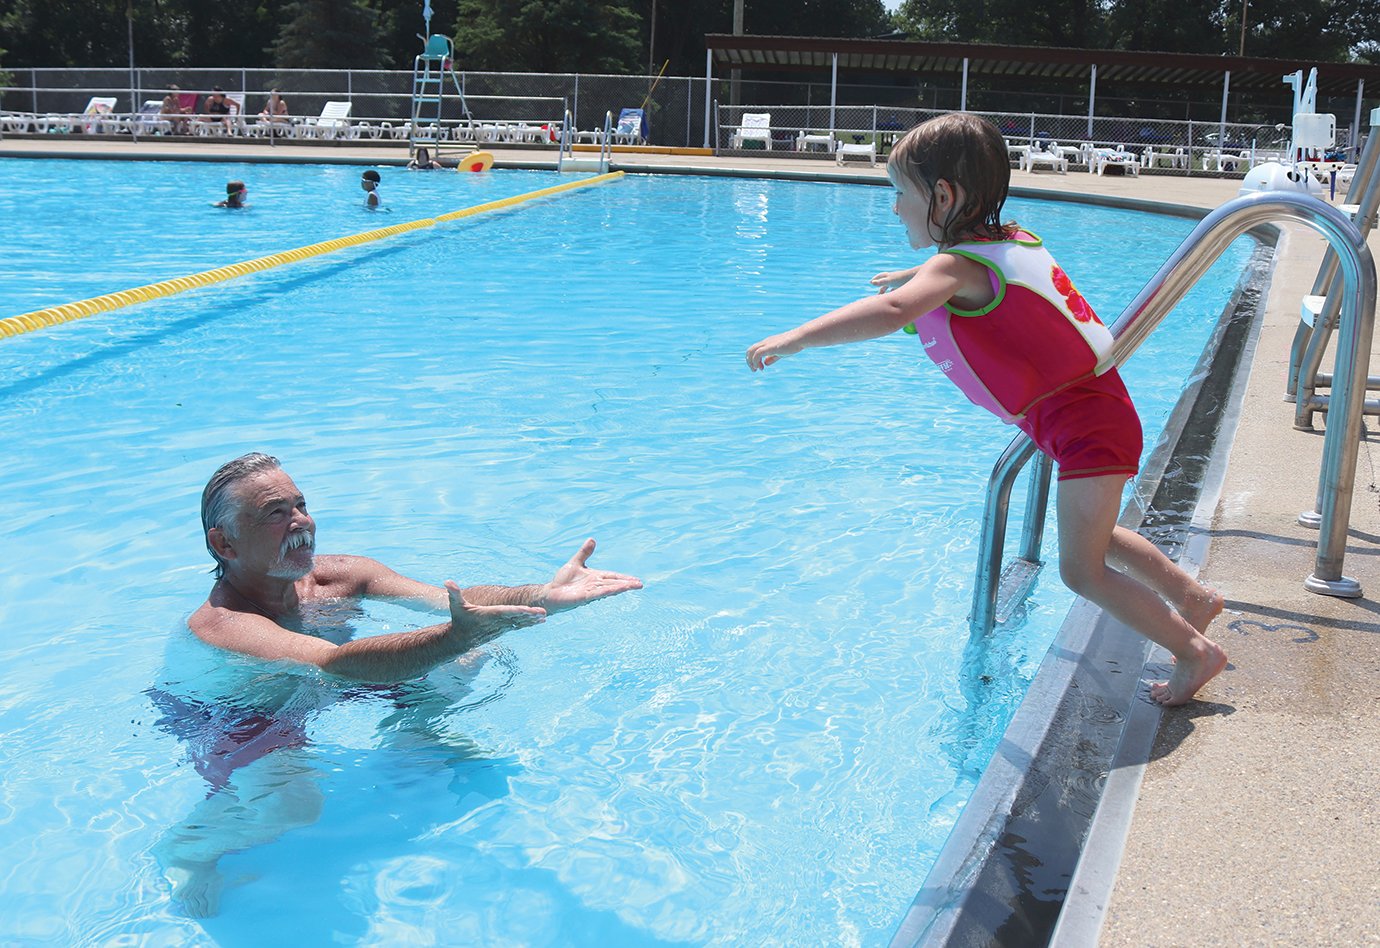 Rosalie Gleeson, 3, leaps into the Milligan Park Pool on Thursday while her father, Tim, waits to catch her.